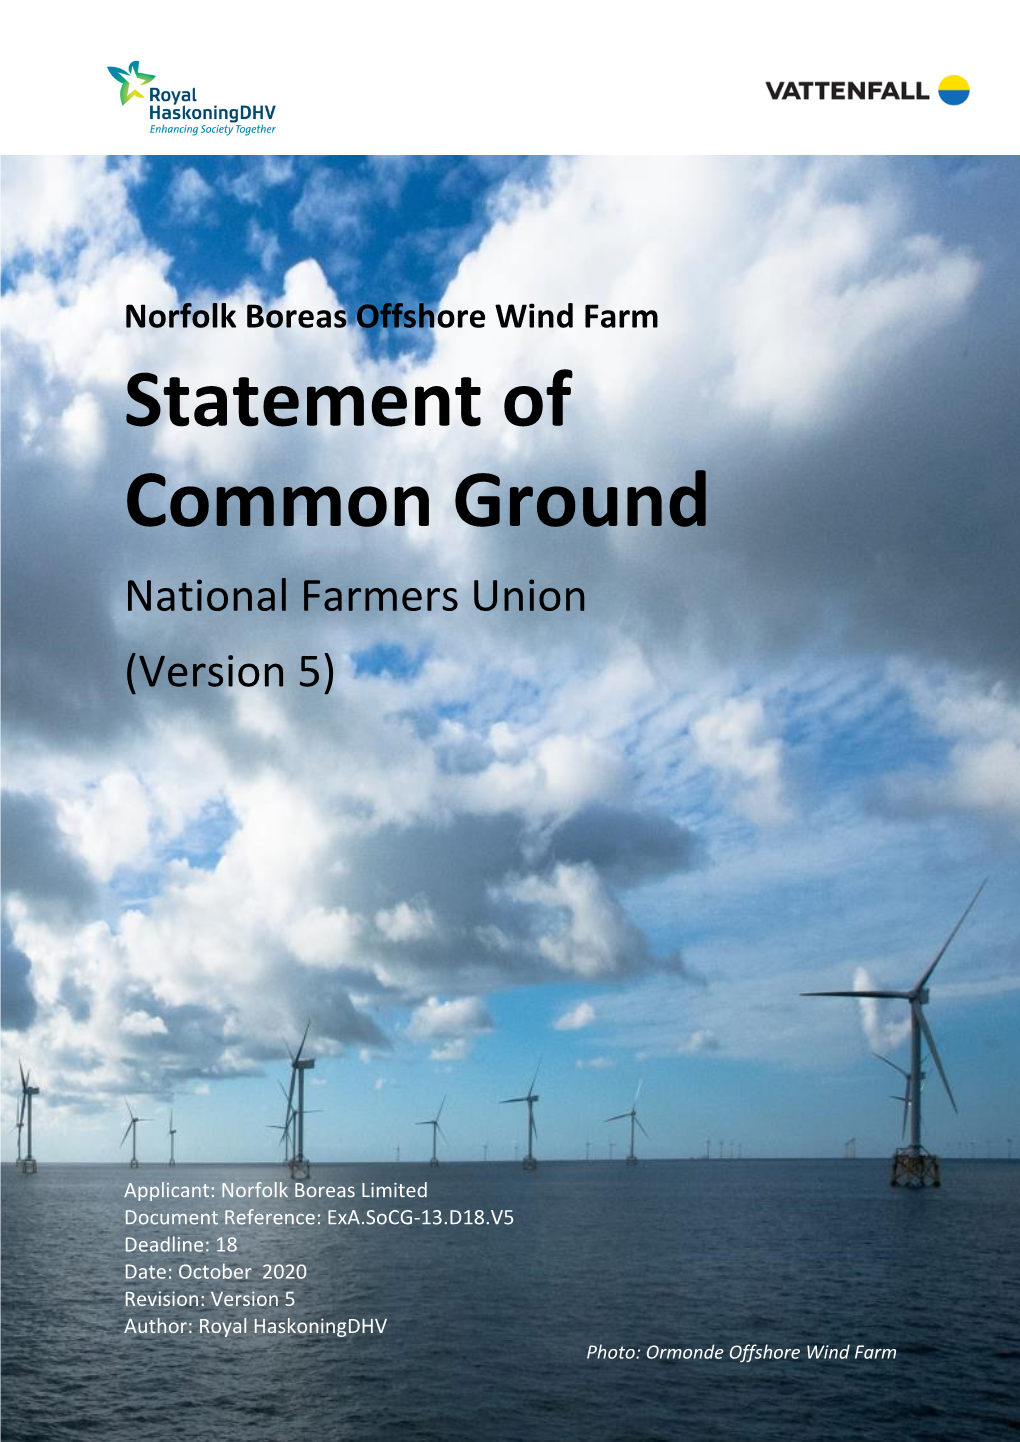 Norfolk Boreas Offshore Wind Farm Statement of Common Ground National Farmers Union (Version 5)